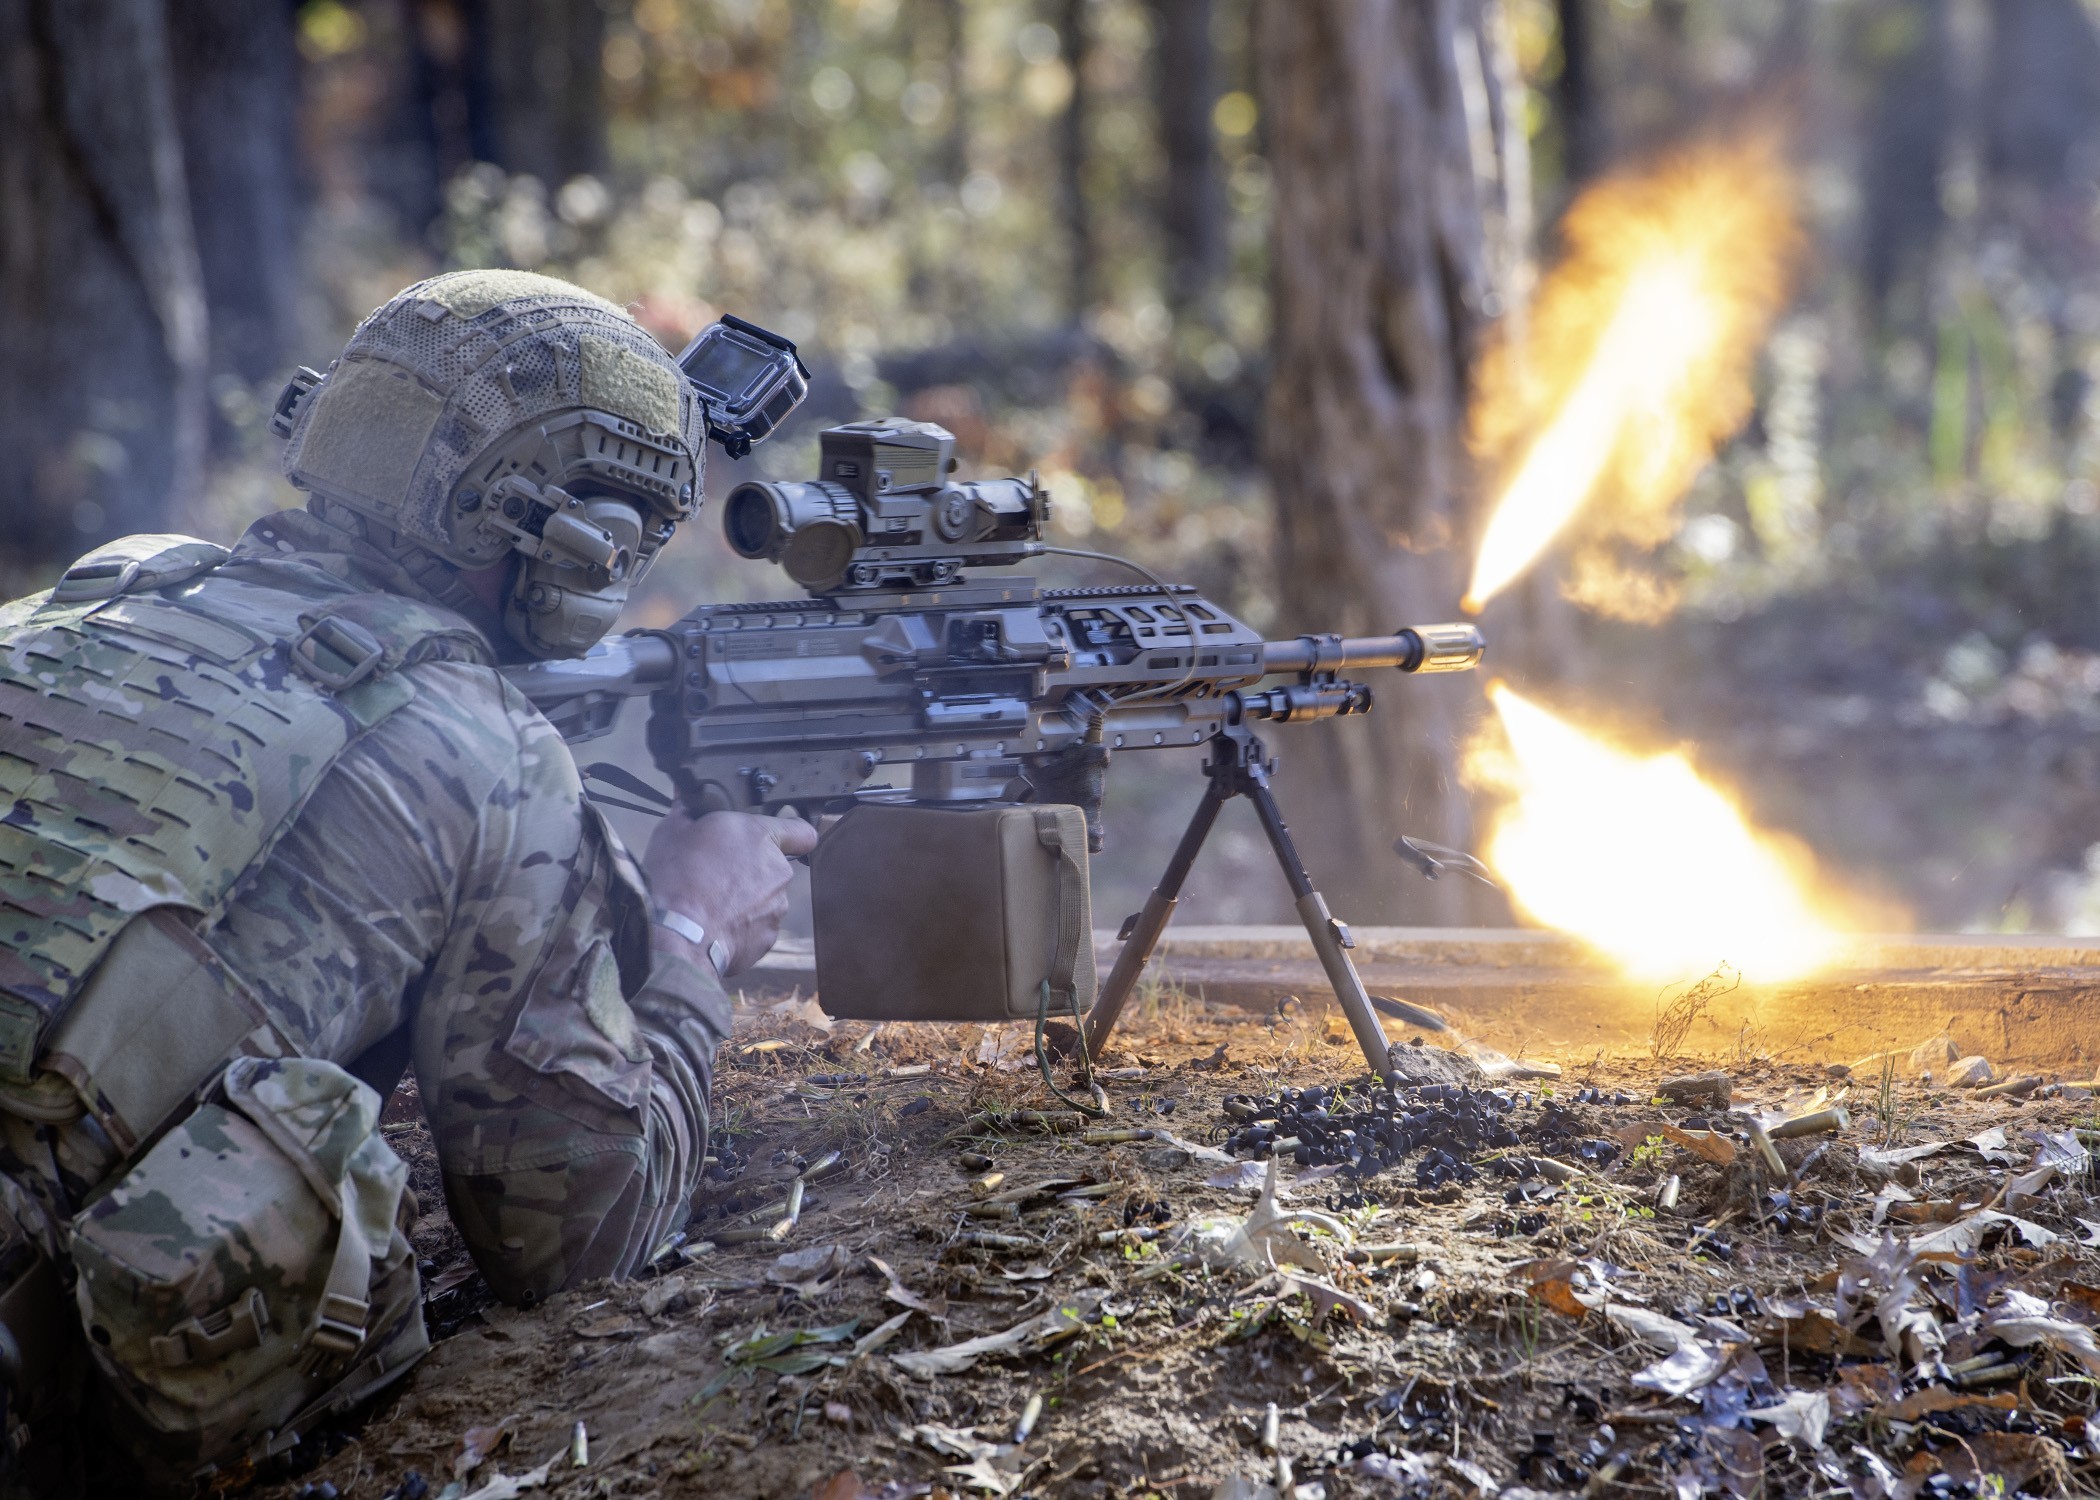 A Ranger with the 1st Battalion, 75th Ranger Regiment engages targets during squad live fire (blank iteration), while operationally testing at Fort Campbell, Kentucky. (U.S. Army photo by Mark Scovell)